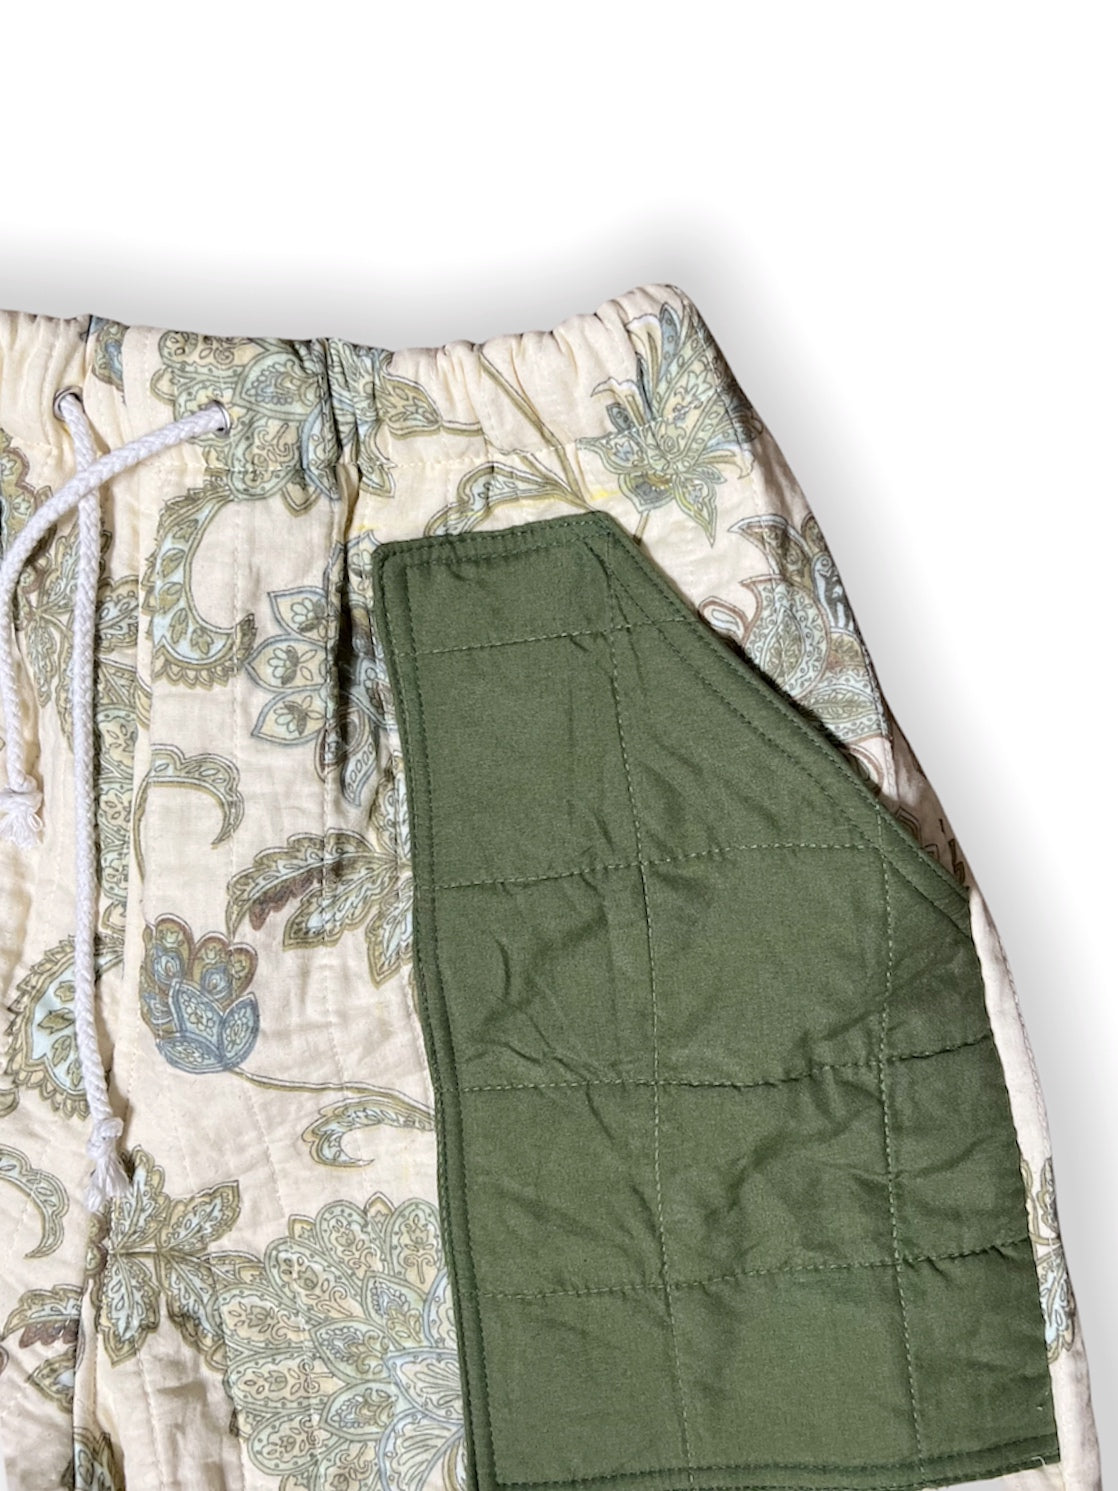 Reworked unisex quilted green paisley print shorts